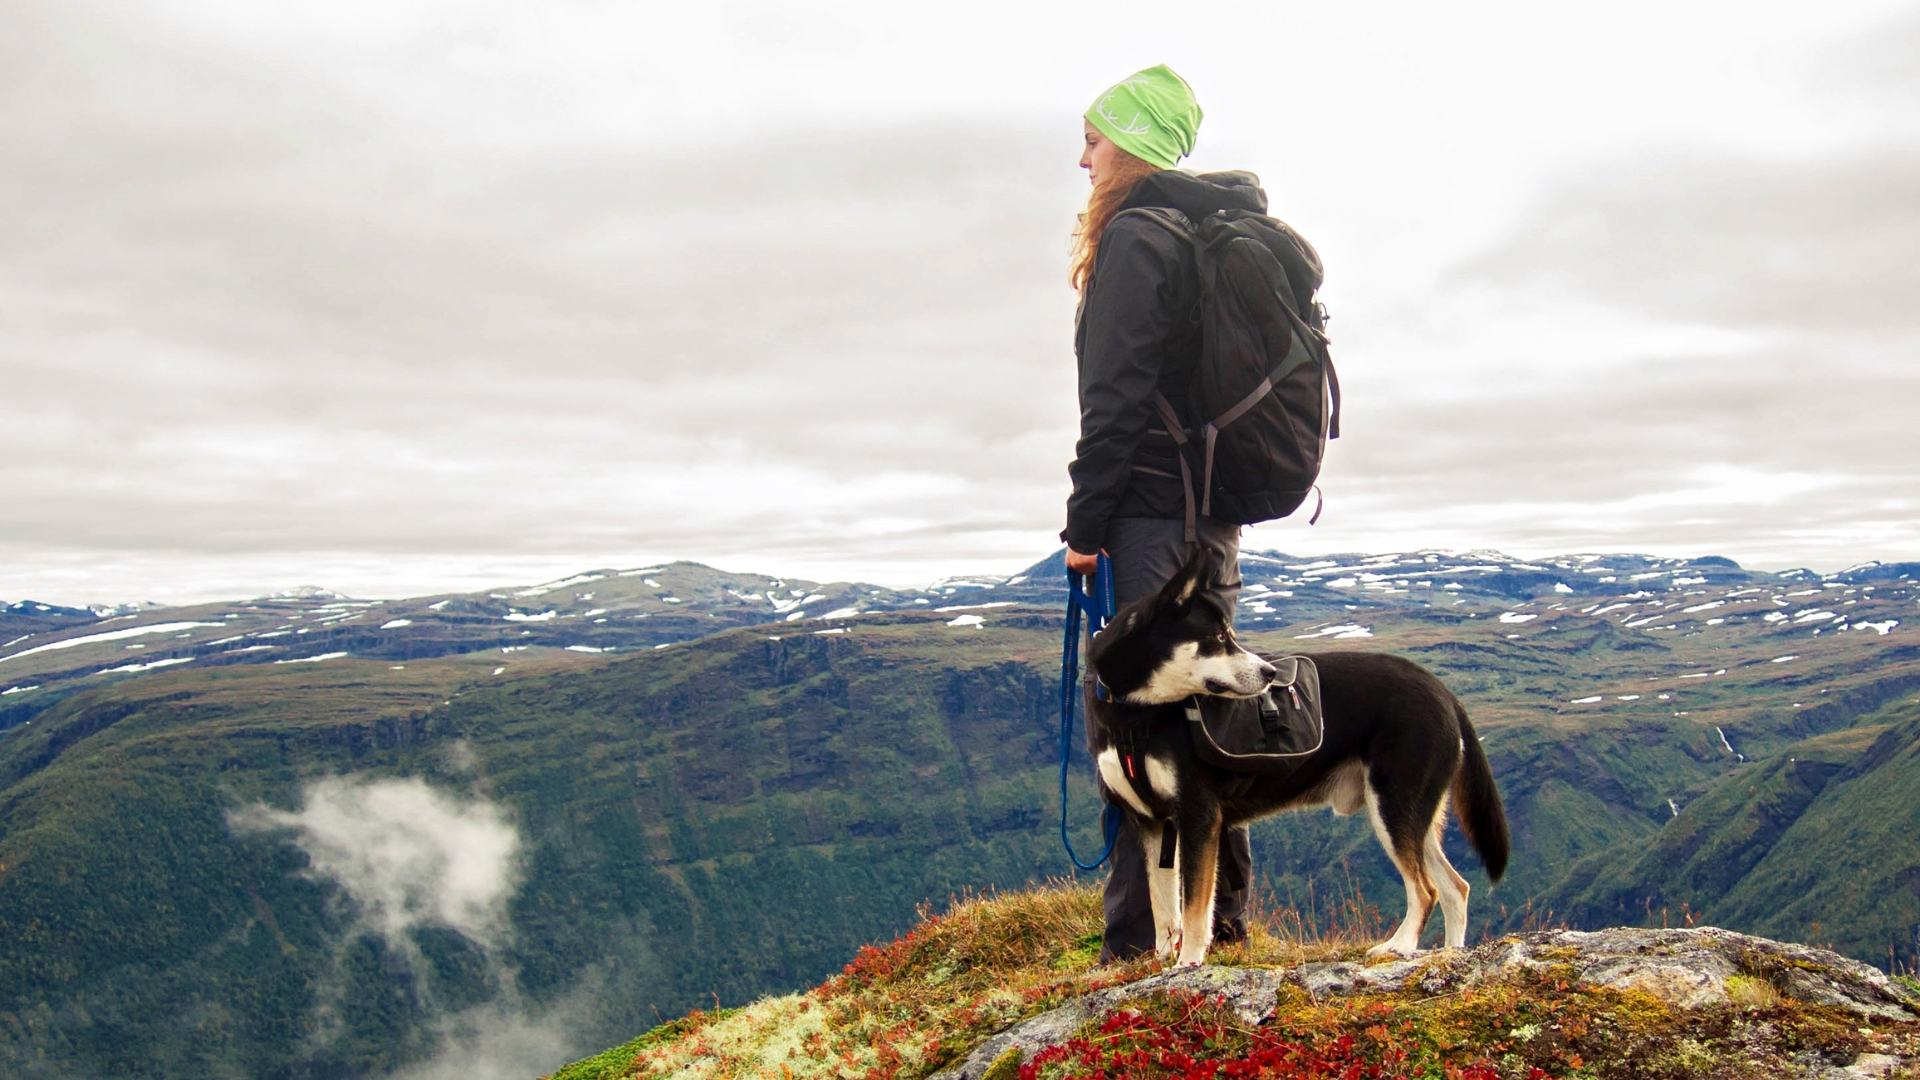 A woman wearing hiking gear stands at the top of a mountain with her dog, surveying the snow-capped mountainous landscape around her.